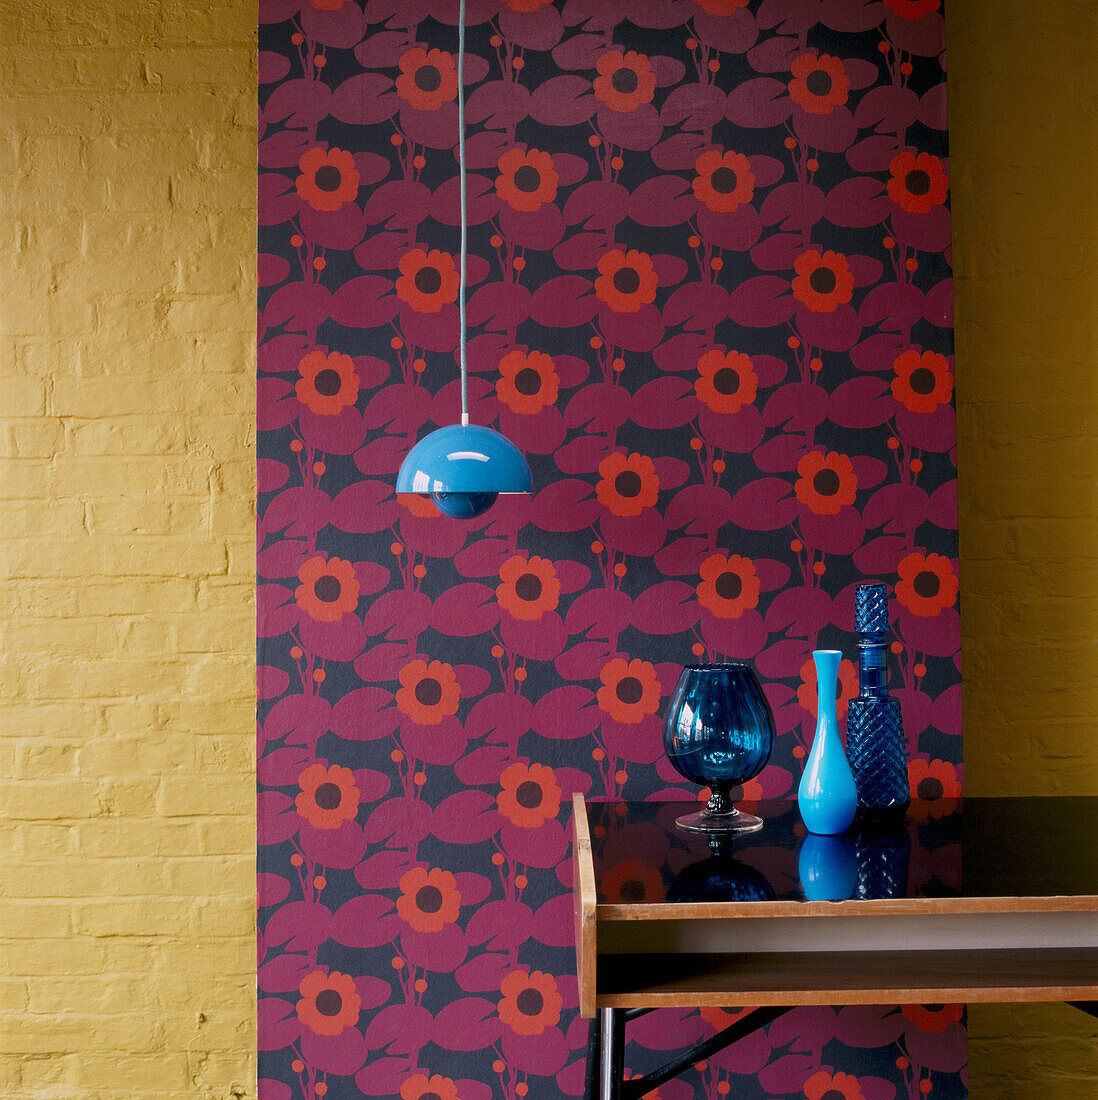 Panel of patterned wallpaper against a painted brick wall side table and home wares